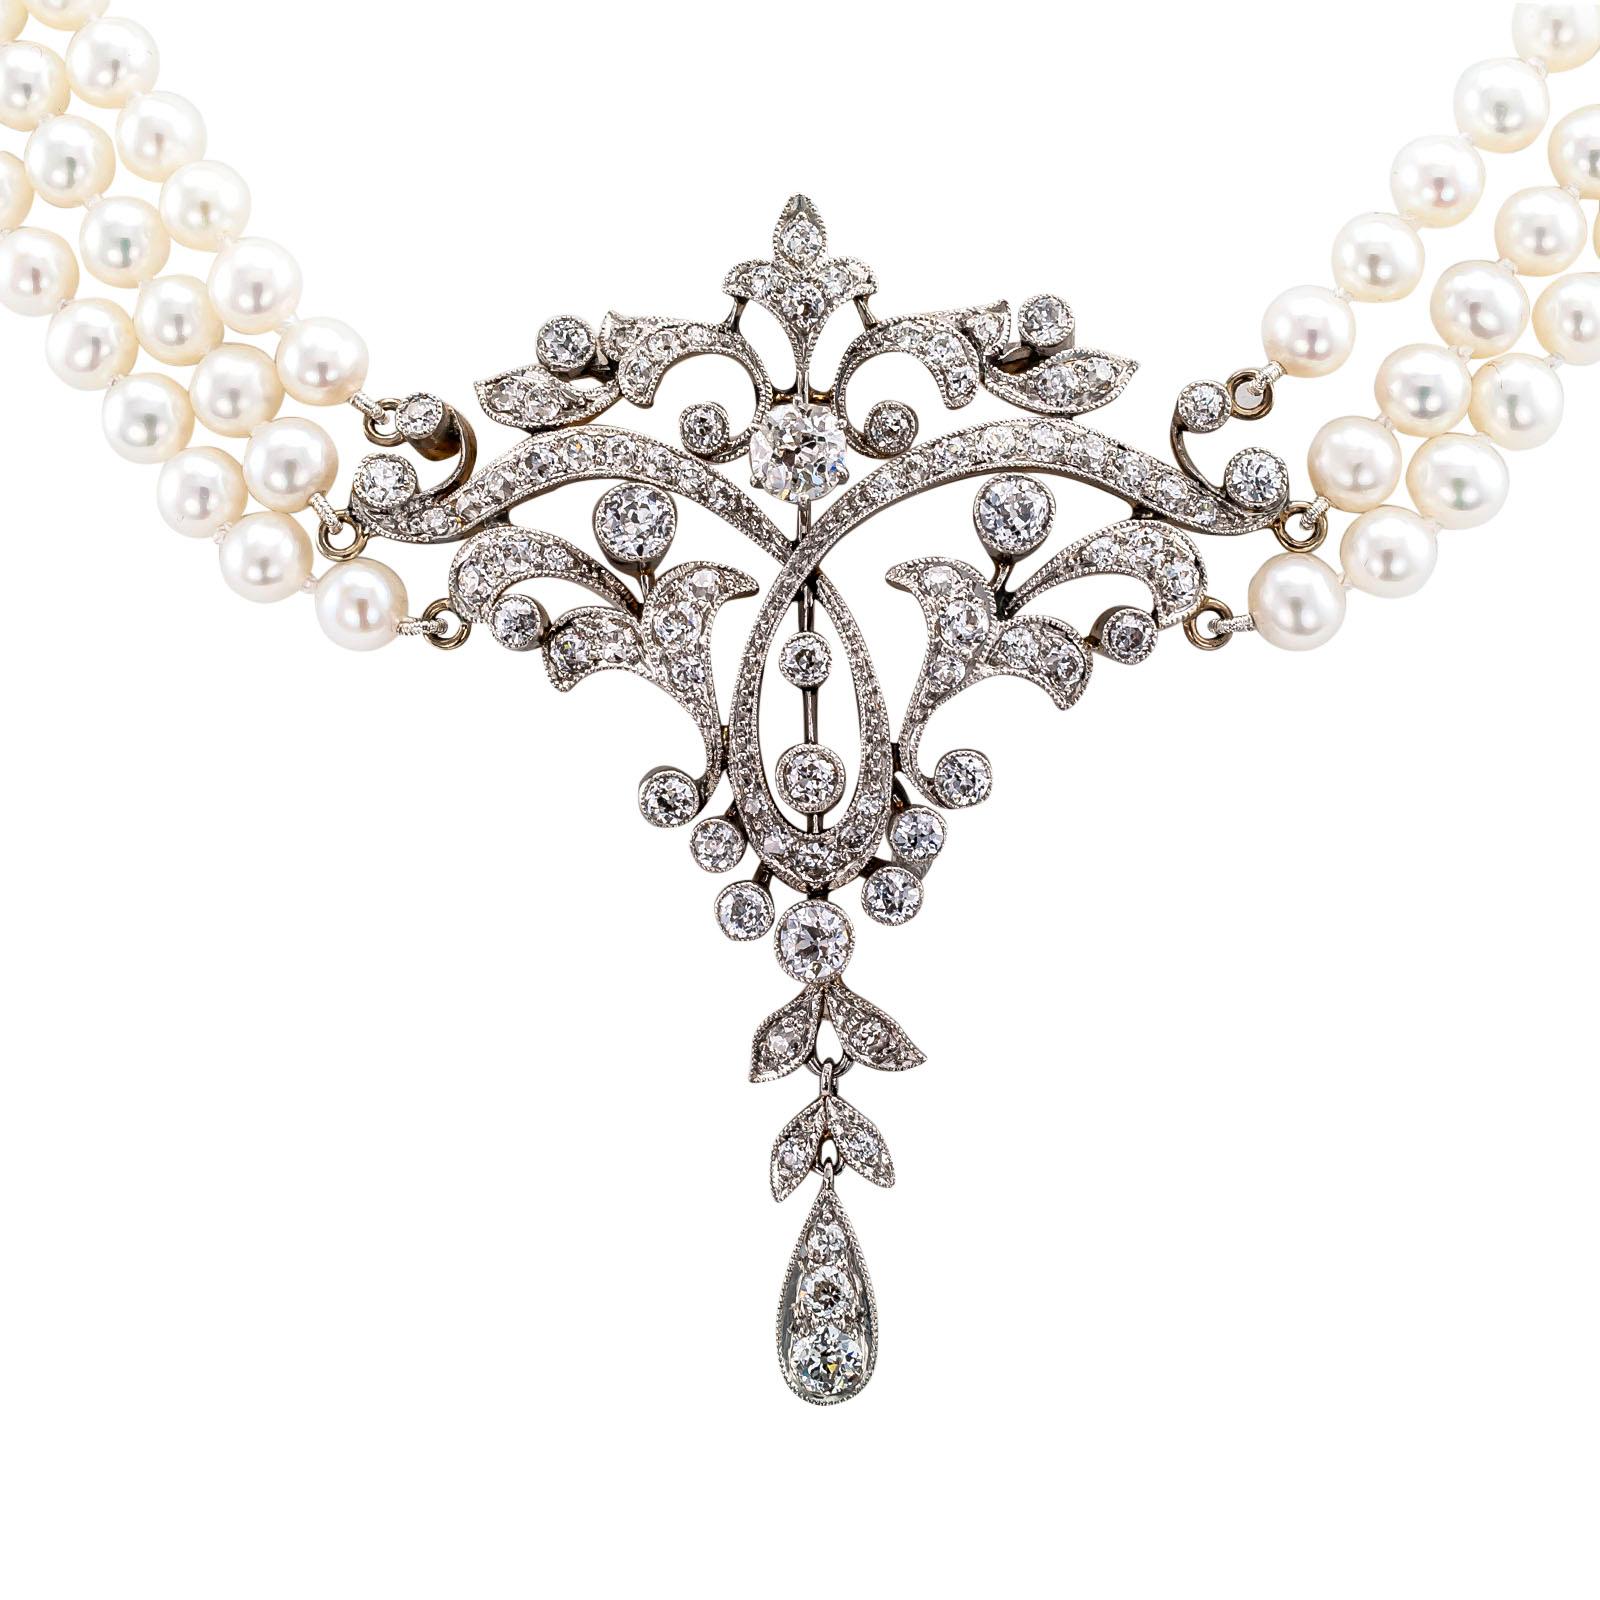 Edwardian diamond pearl gold and platinum necklace circa 1910.

DETAILS:

DIAMONDS: eighty-four circular diamonds totaling approximately 4.50 carats, approximately H – K color and SI – I clarity.

GEMSTONES: cultured pearls measuring 4.5 – 5